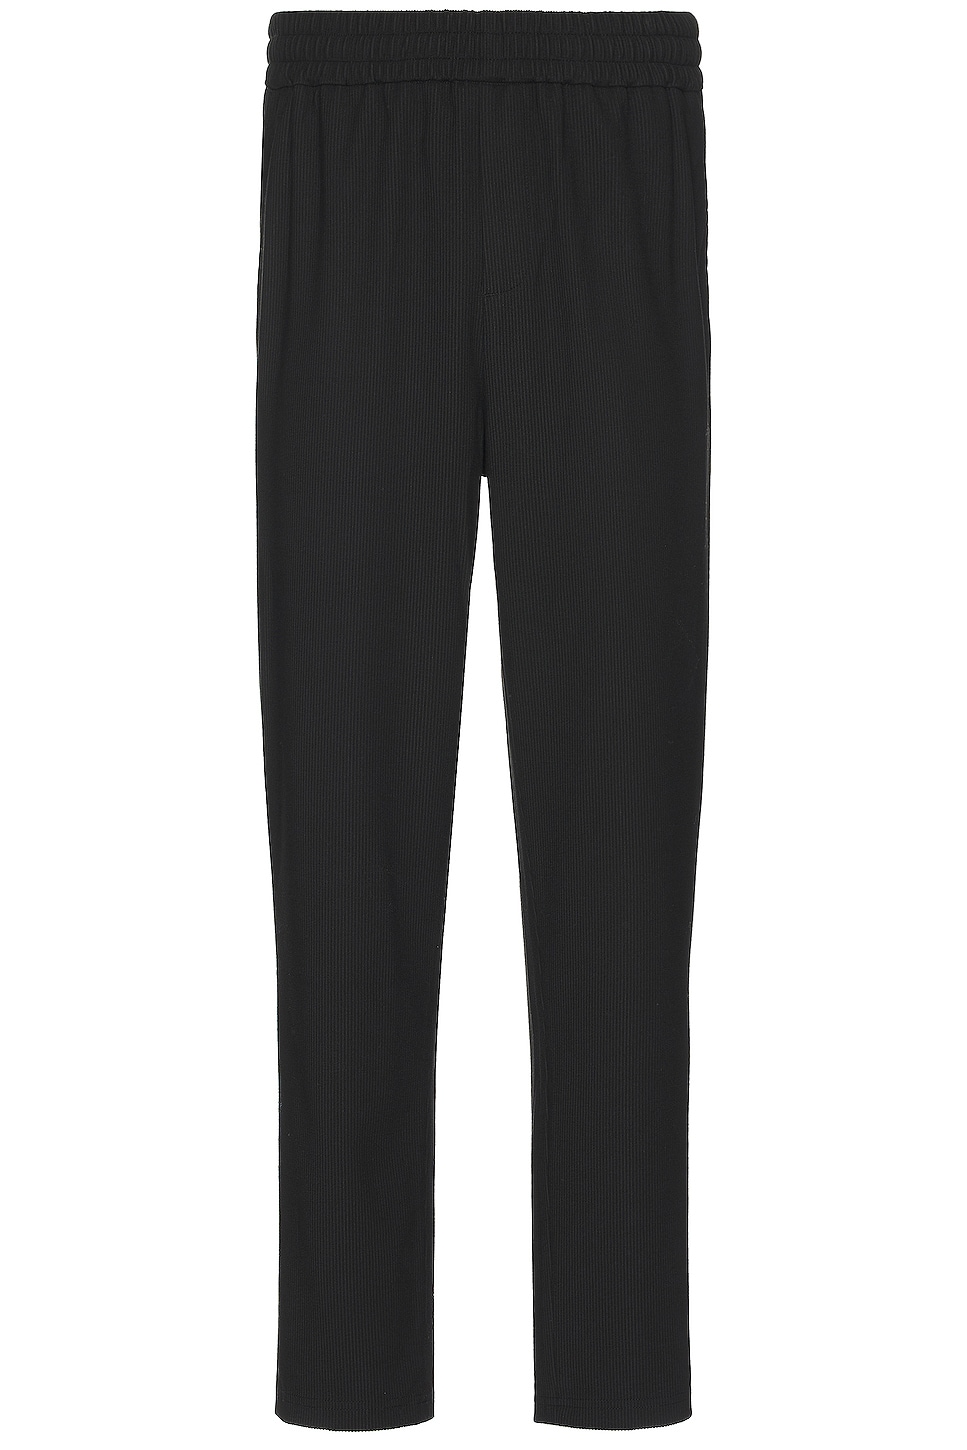 Image 1 of WAO Ribbed Knit Pant in black